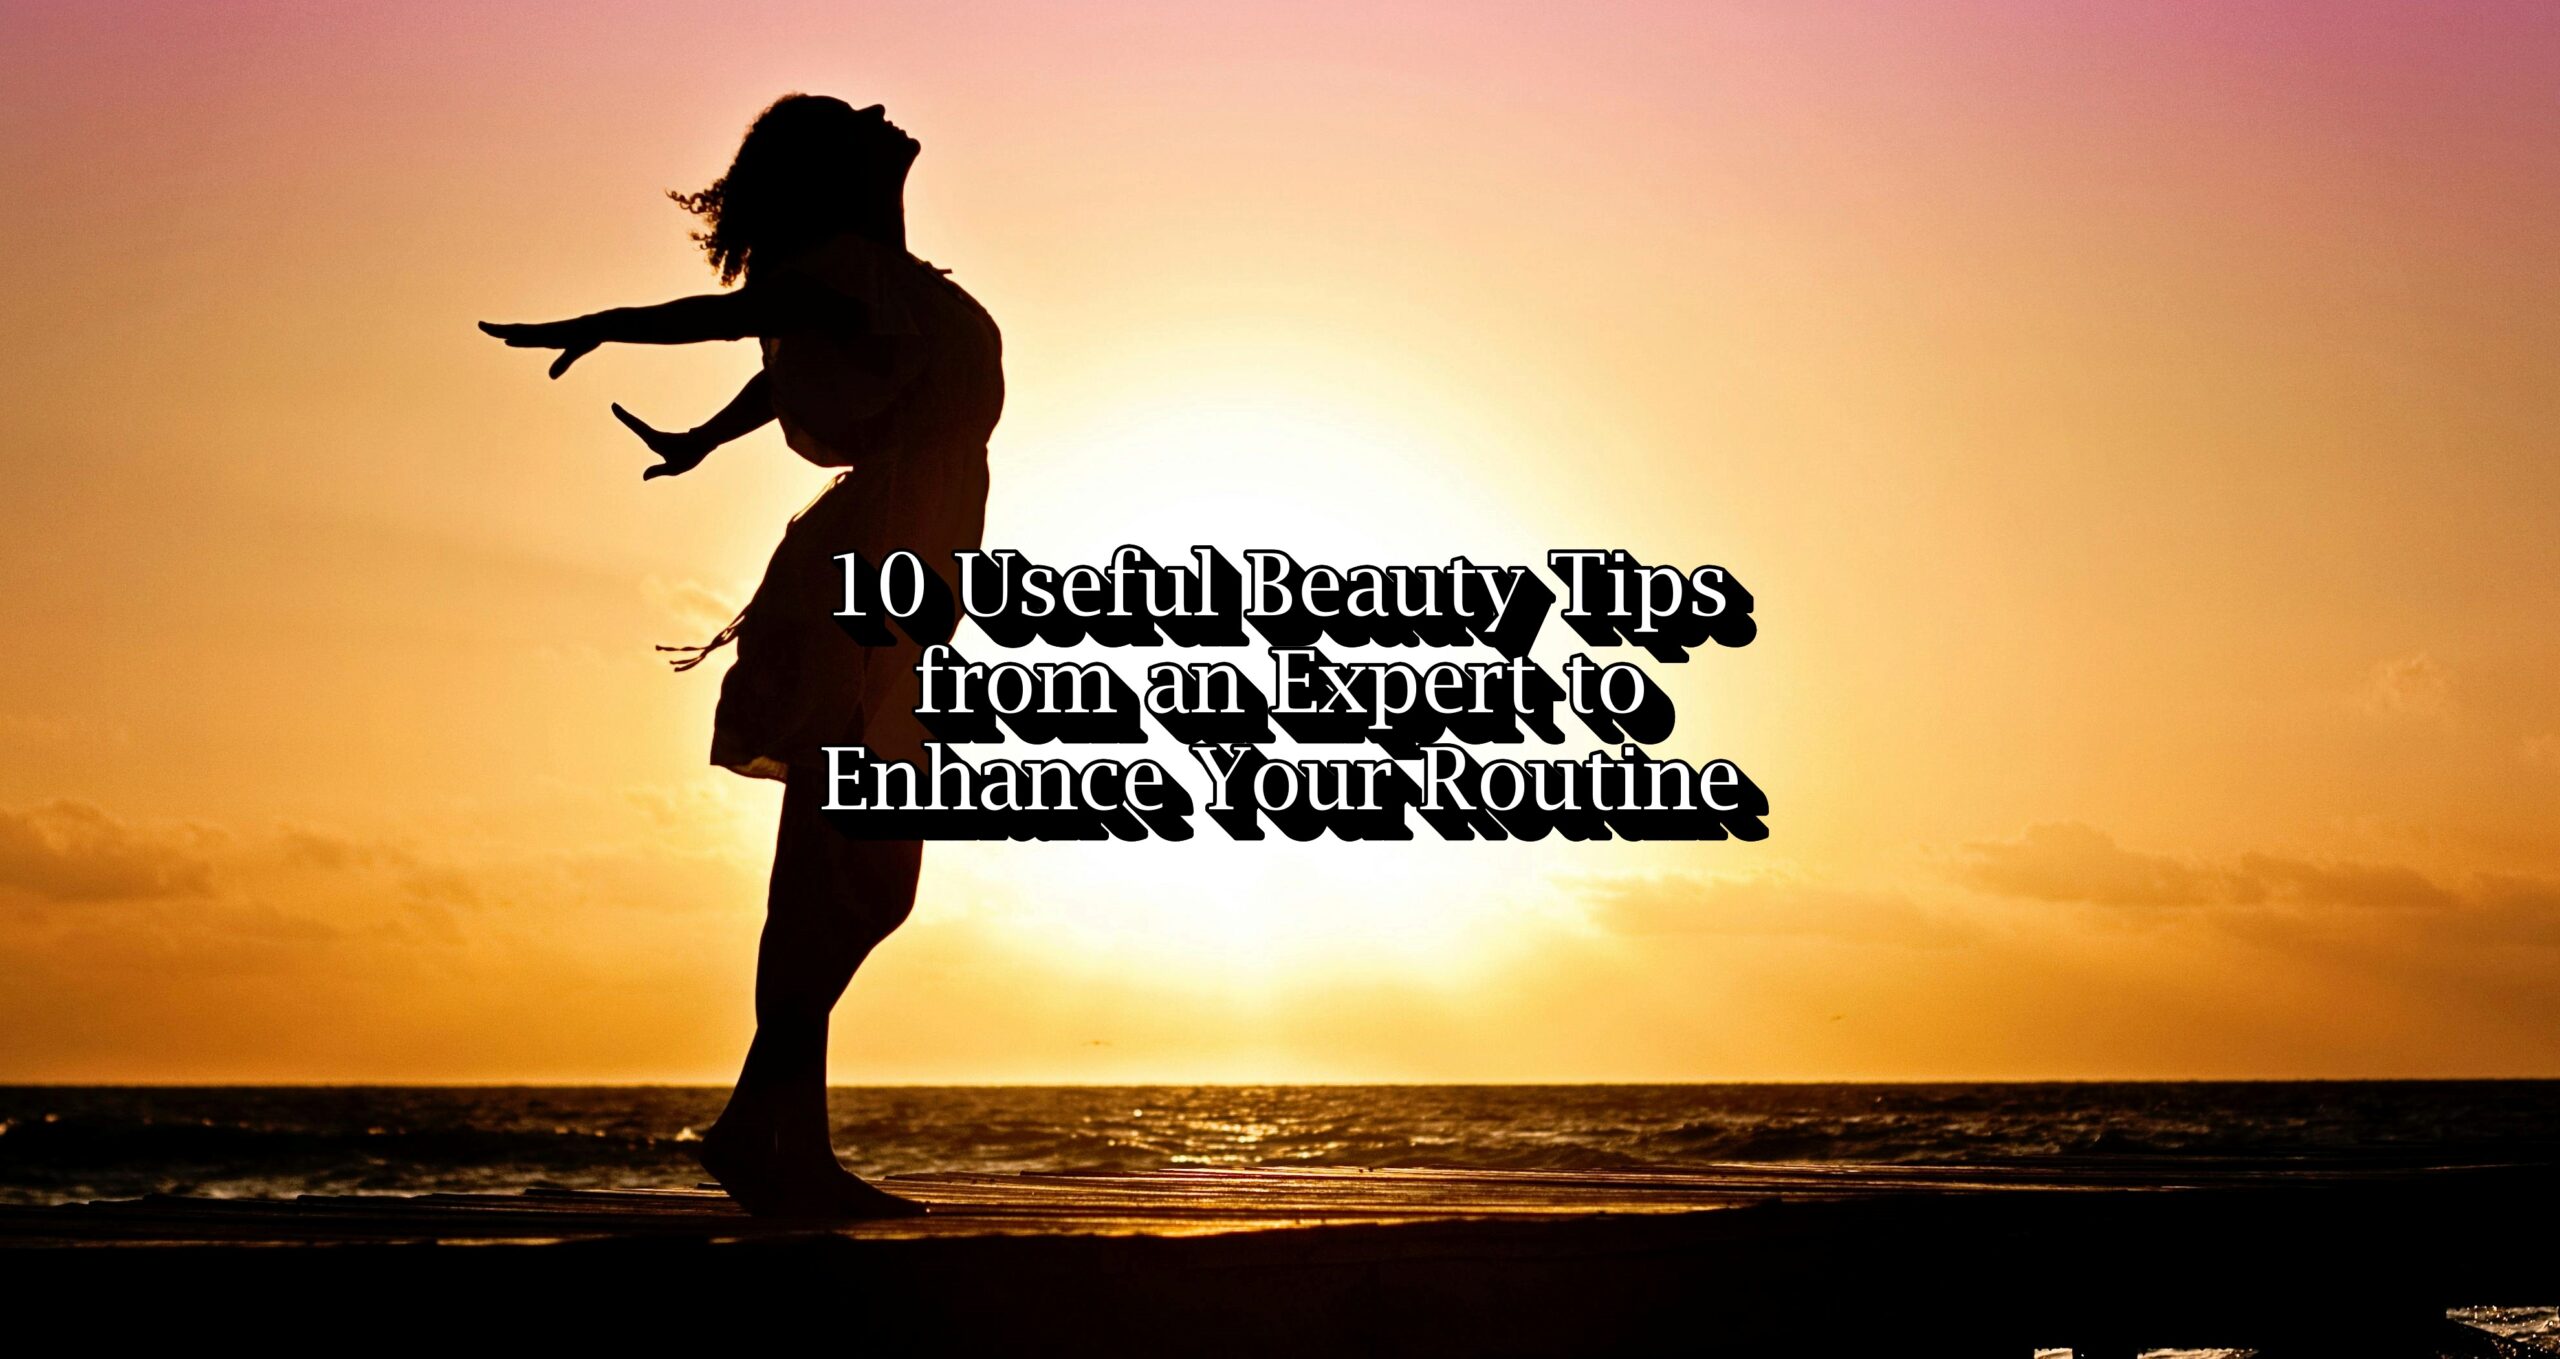 10 Useful Beauty Tips from an Expert to Enhance Your Routine